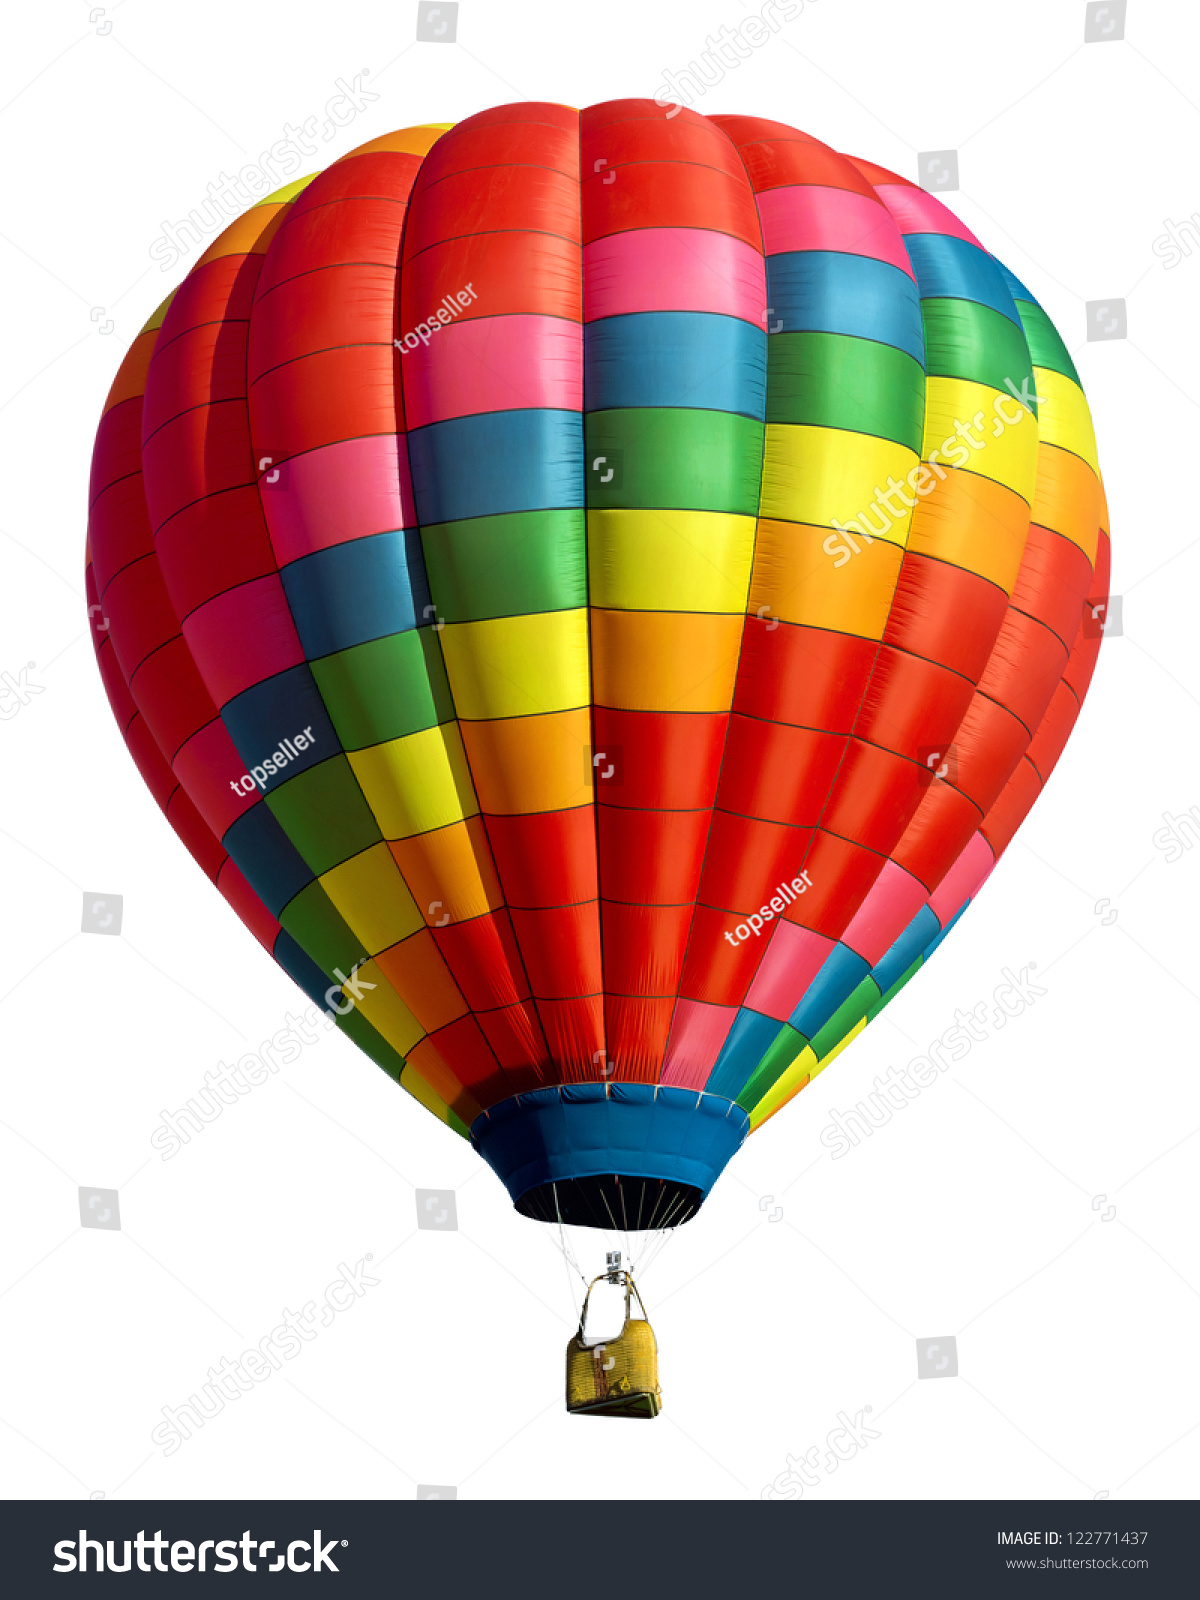 hot air balloon isolated on white background #122771437